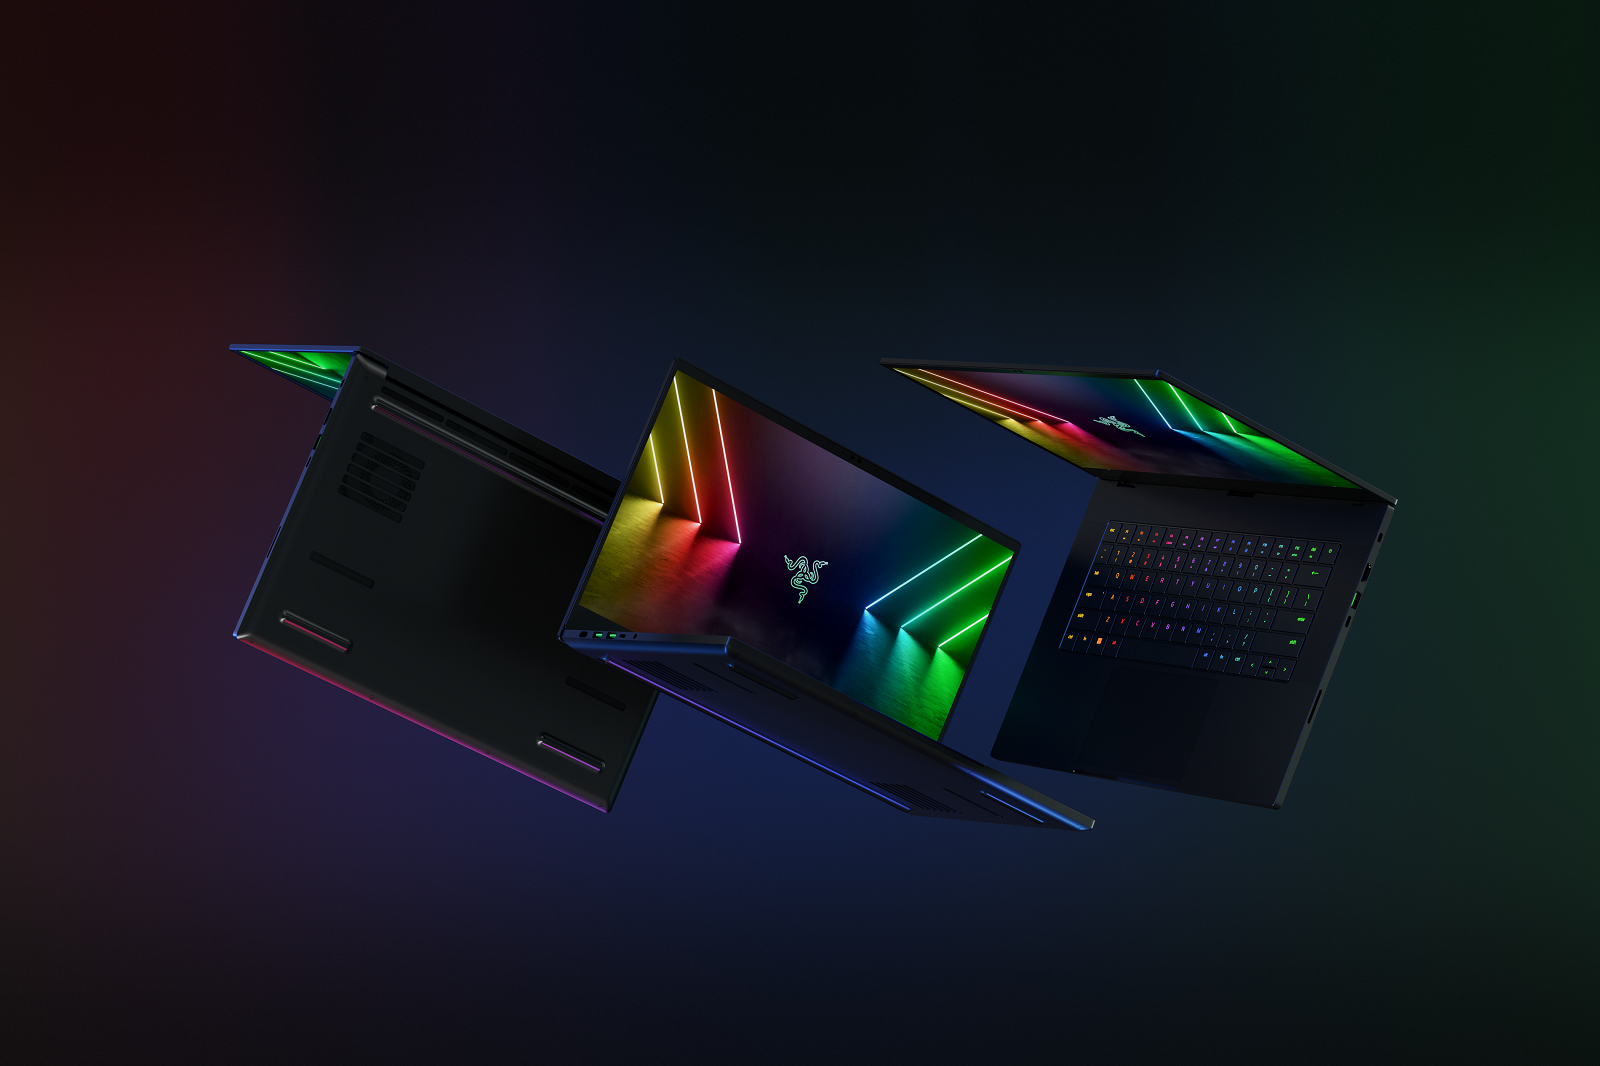 Razer has revealed it's 2022 line-up of Blade gaming laptops at CES photo 1